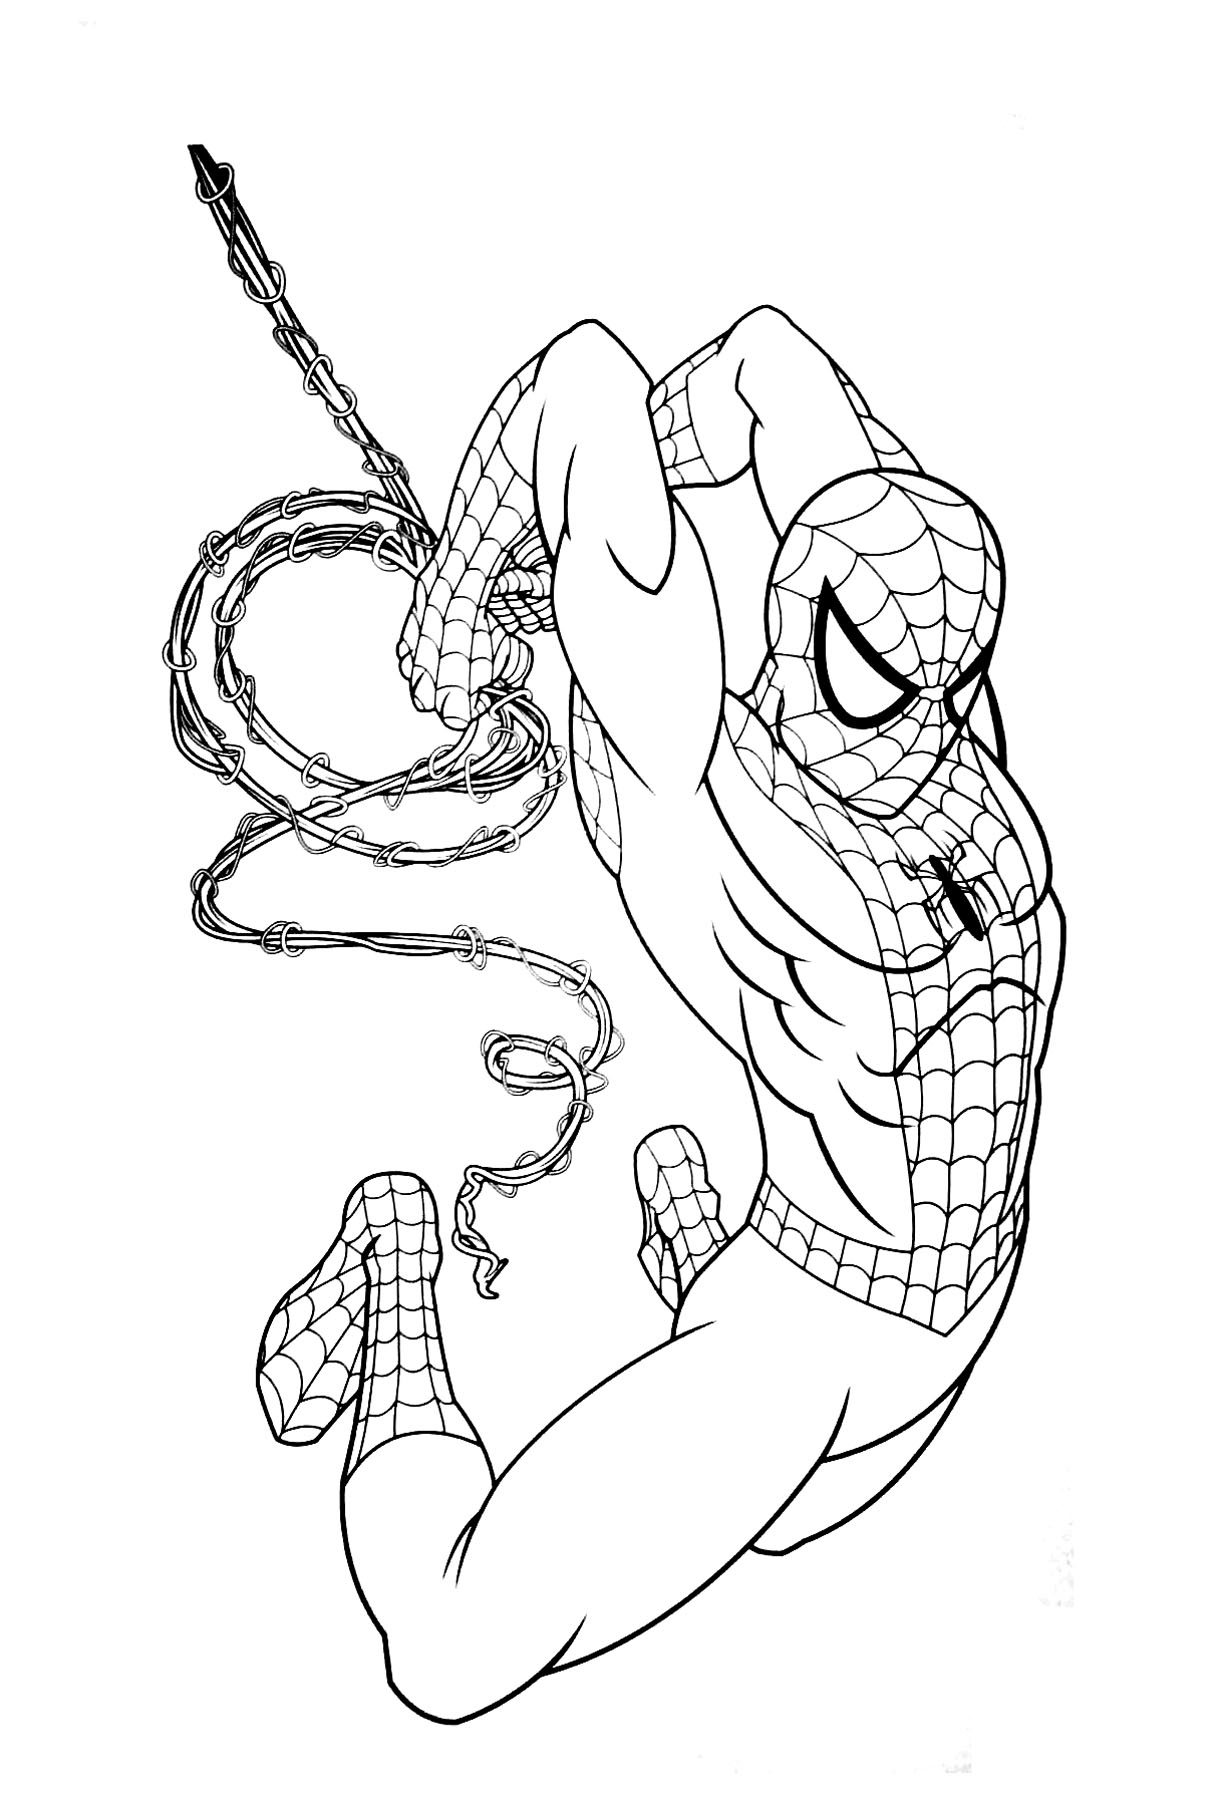 Download Spiderman free to color for children - Spiderman Kids ...